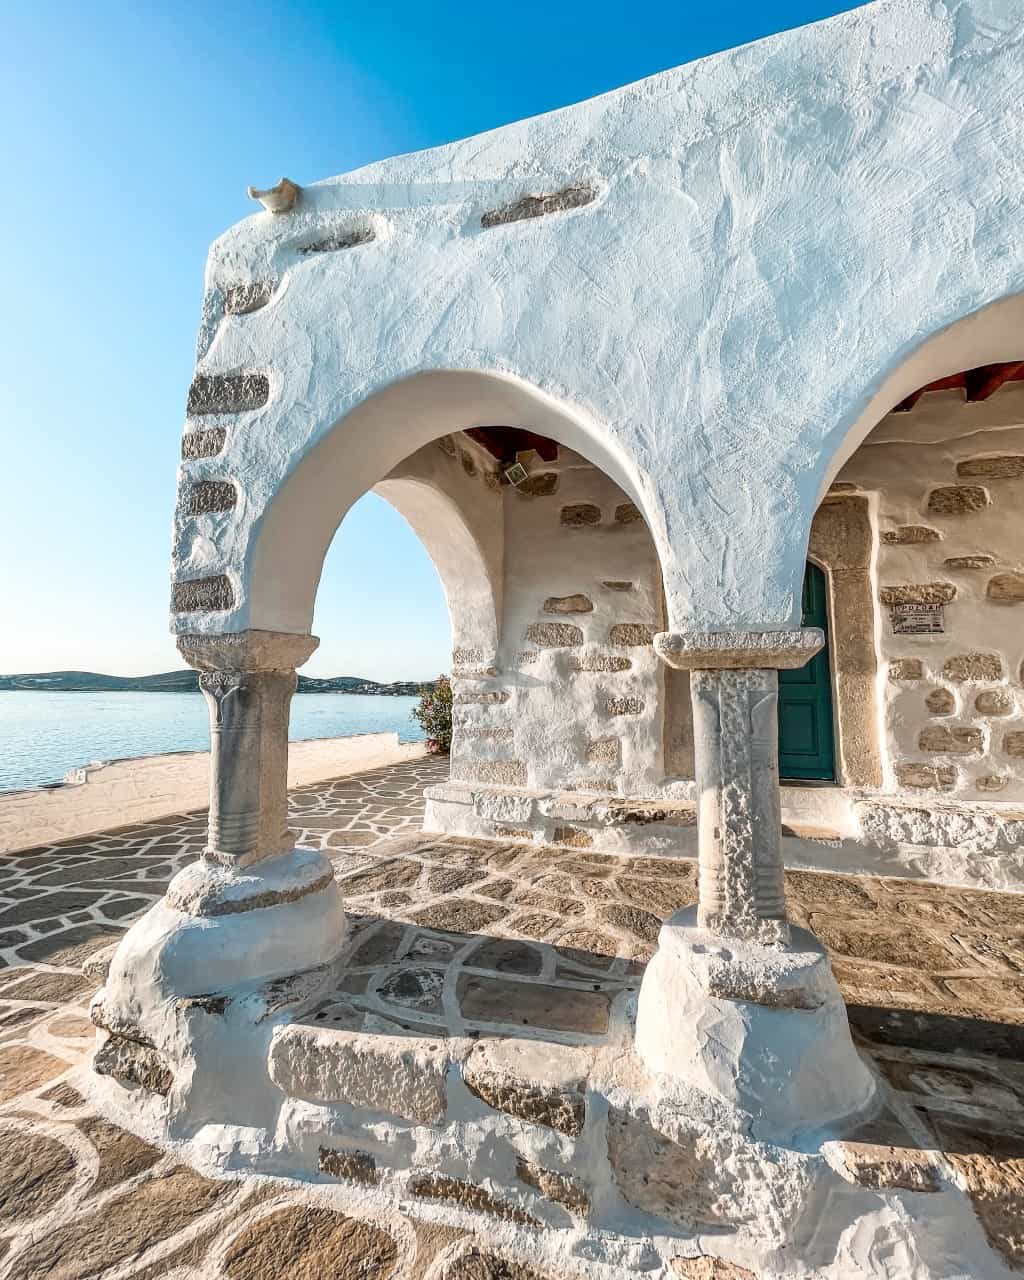 An old, white building with beautiful columns and arches showcasing the Venetian archtitecture in Parikia, Paros.